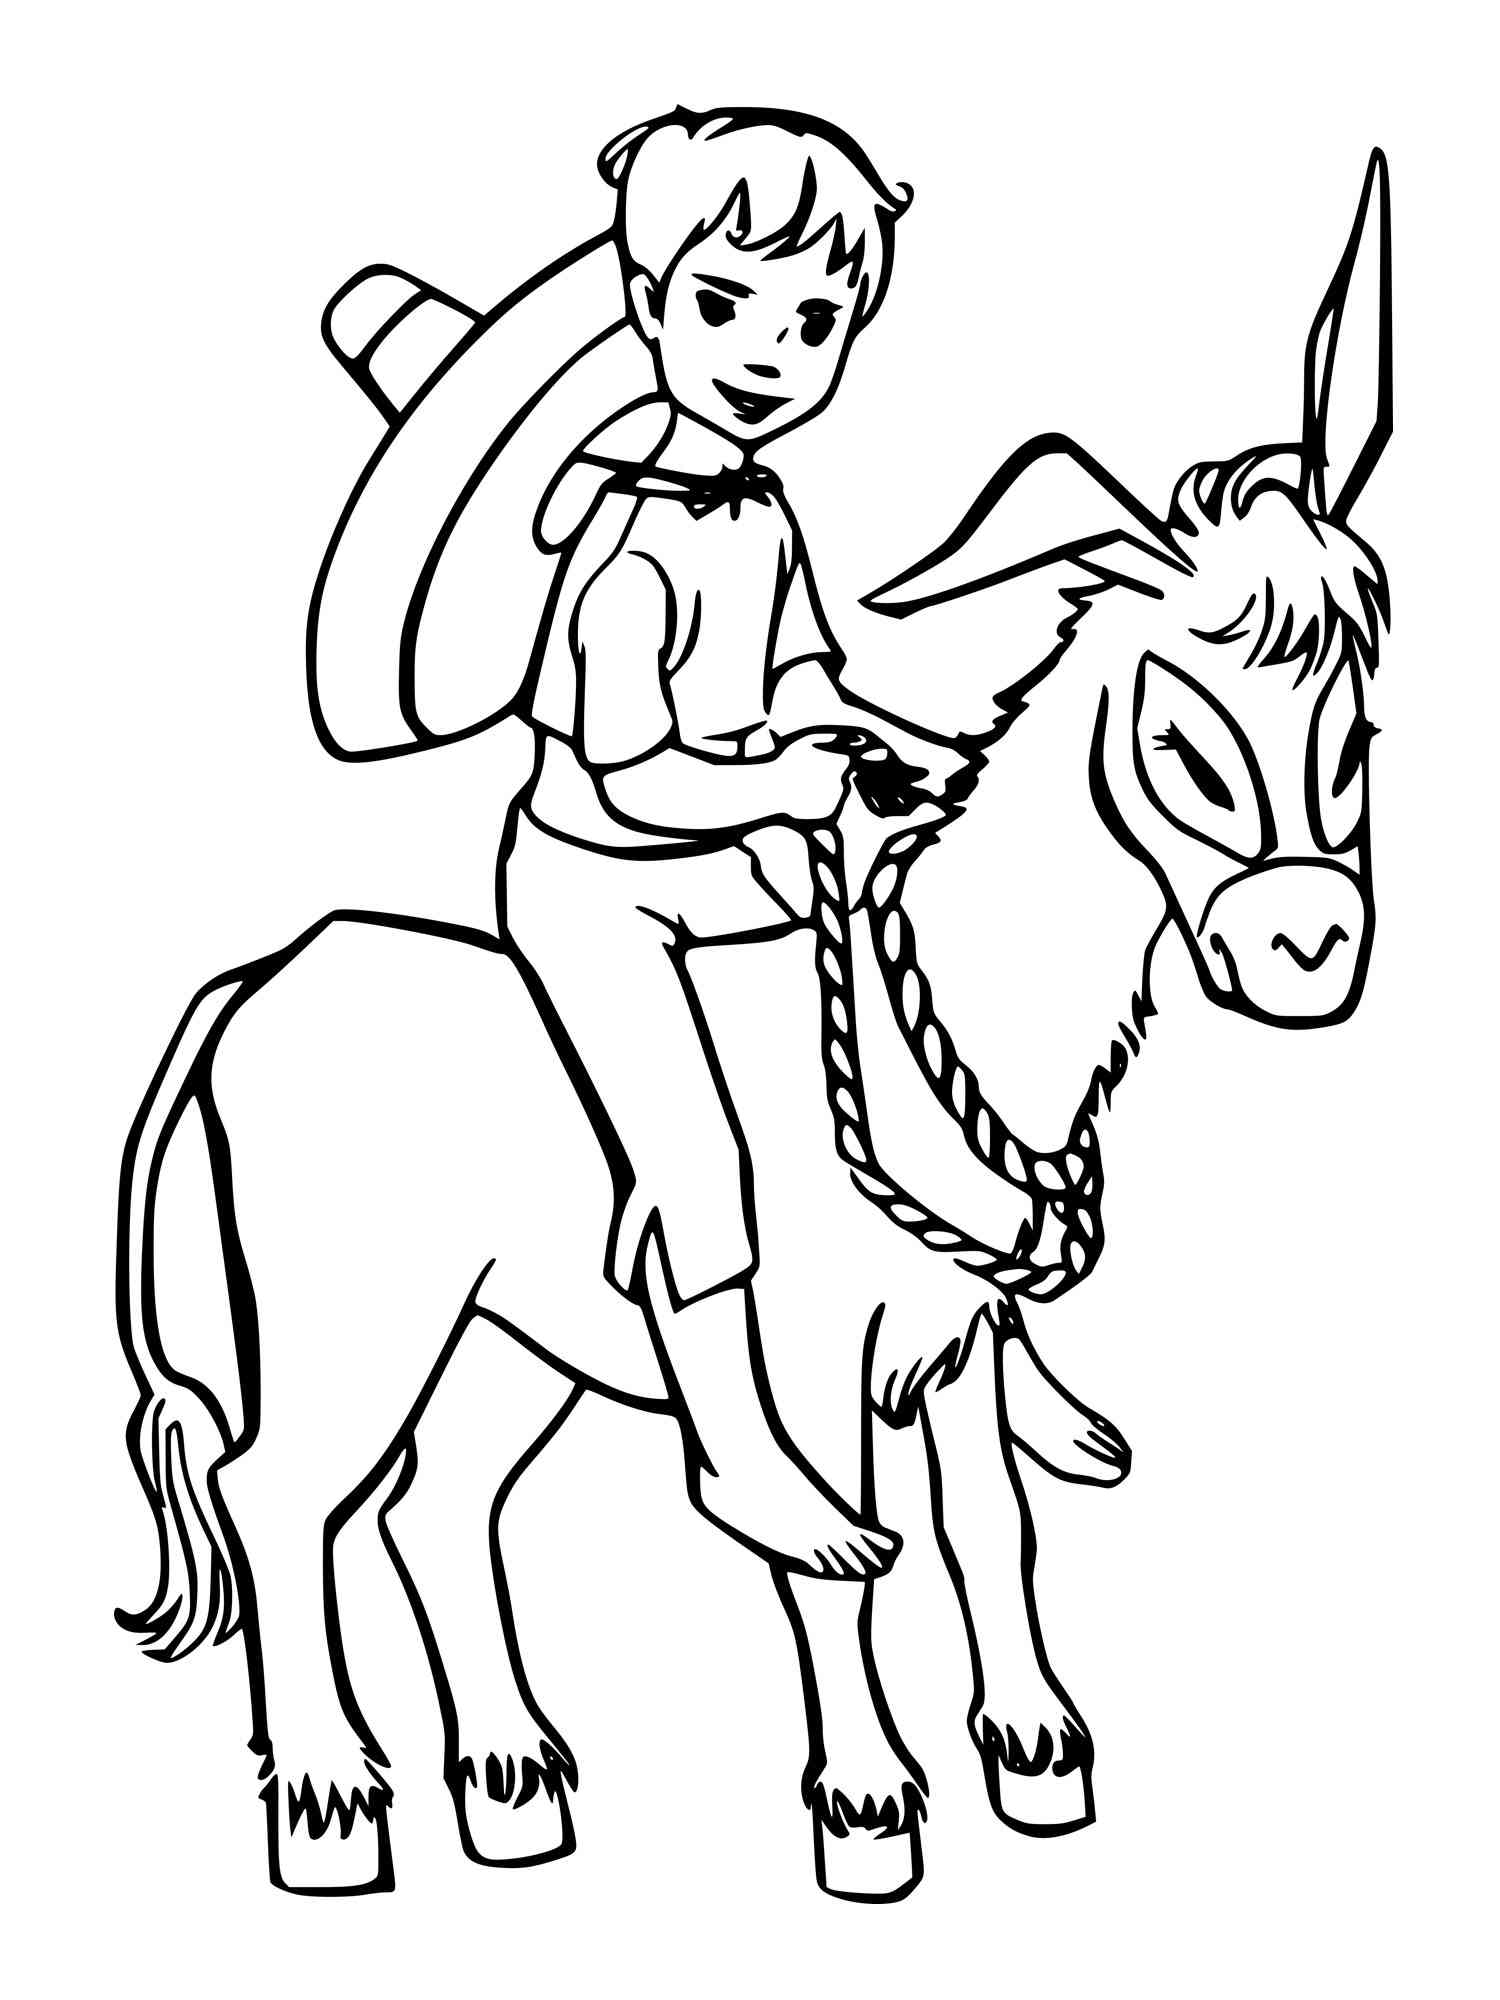 Riding a Mule coloring page